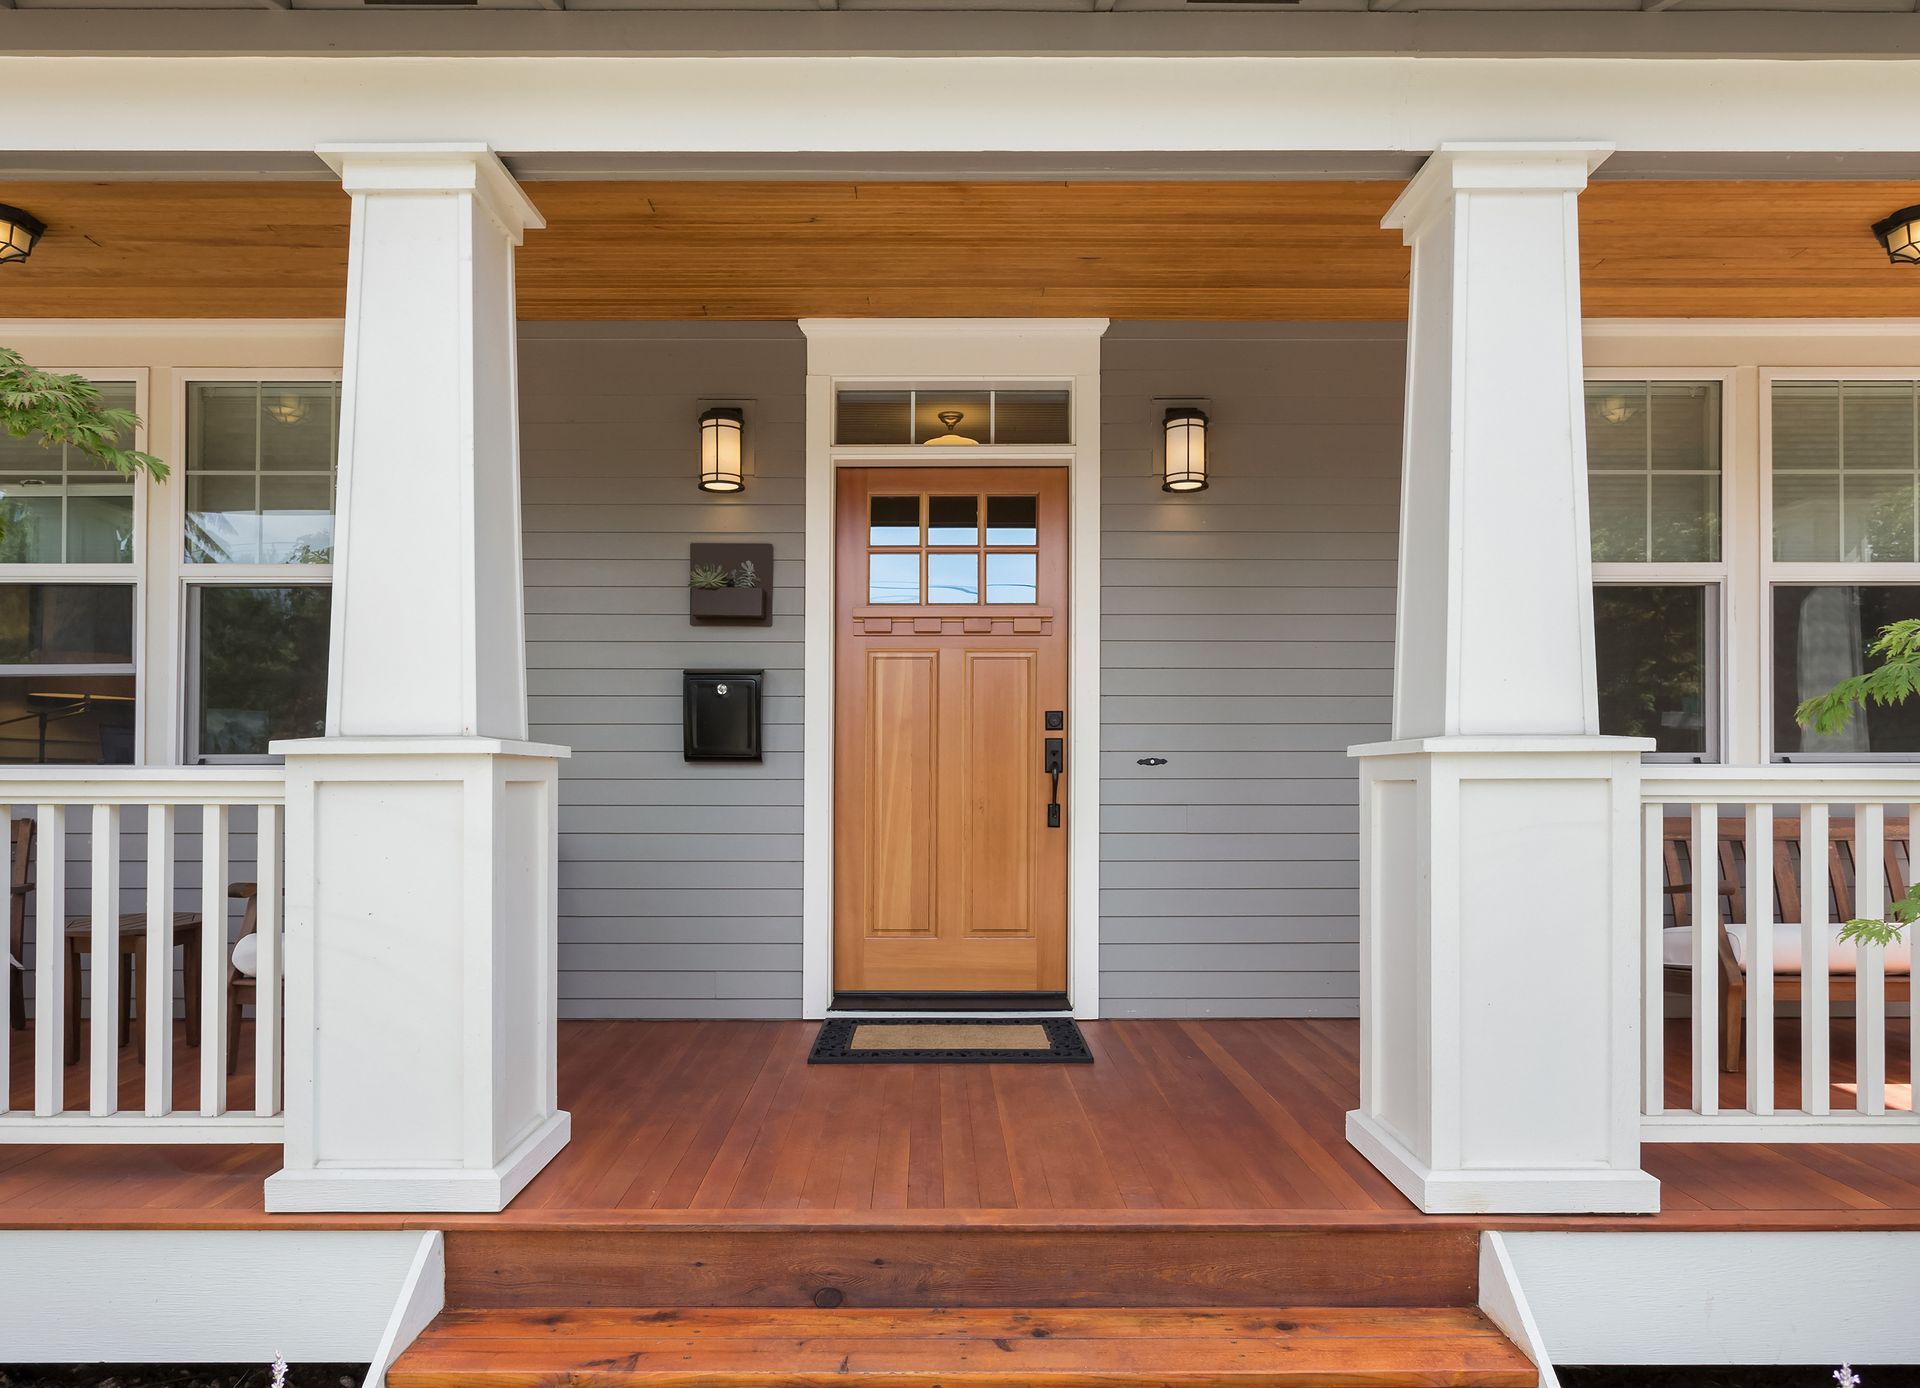 Covered porch and front door of beautiful new home with welcoming entrance.